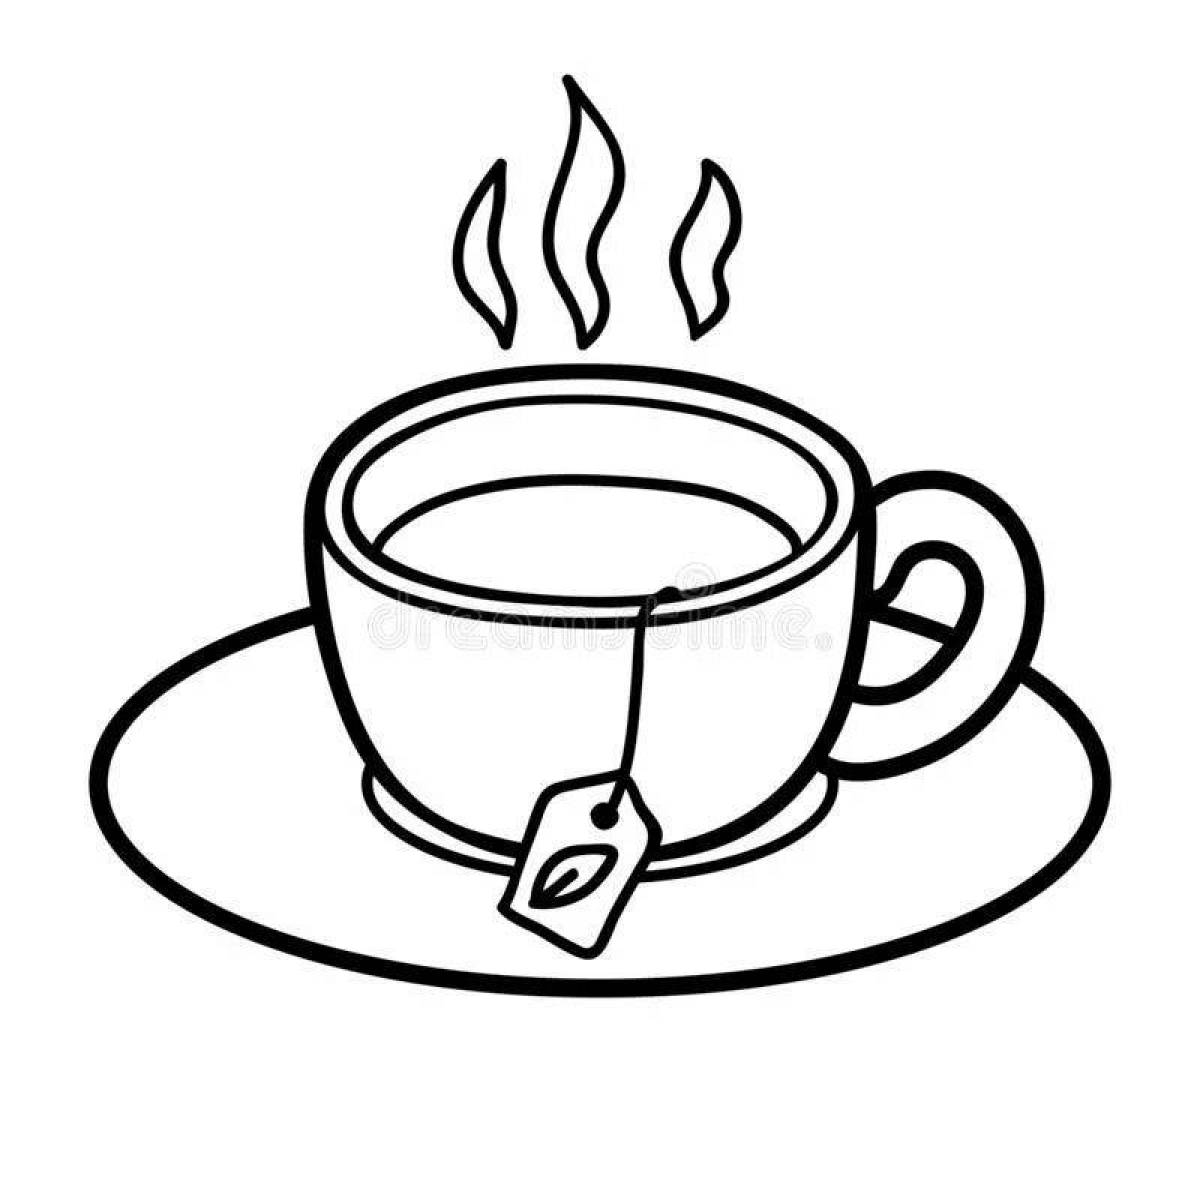 Coloring page gentle cup of tea